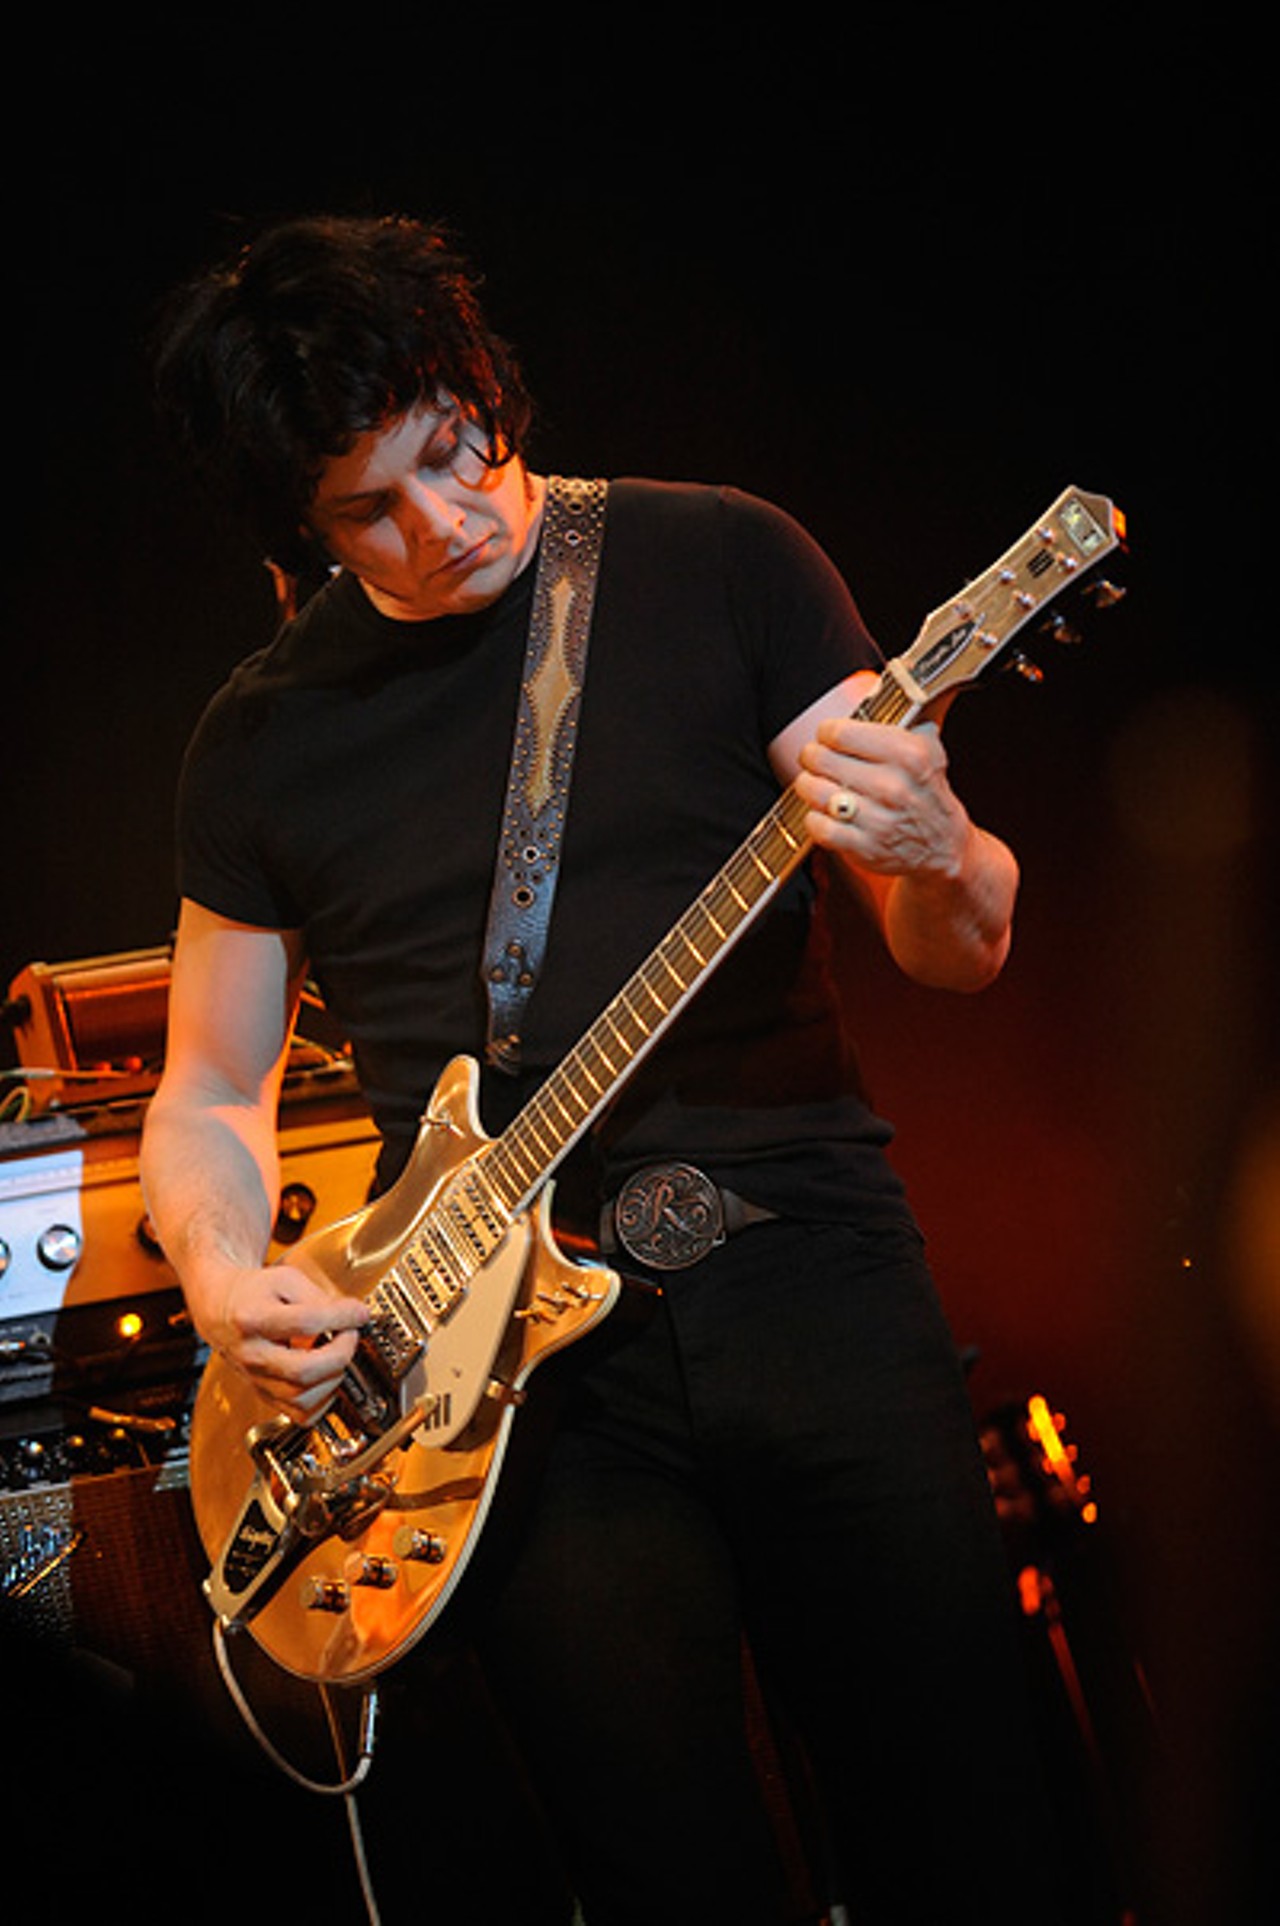 Jack White, who was ranked #17 in Rolling Stone magazine's list of the "100 Greatest Guitarists of All Time."